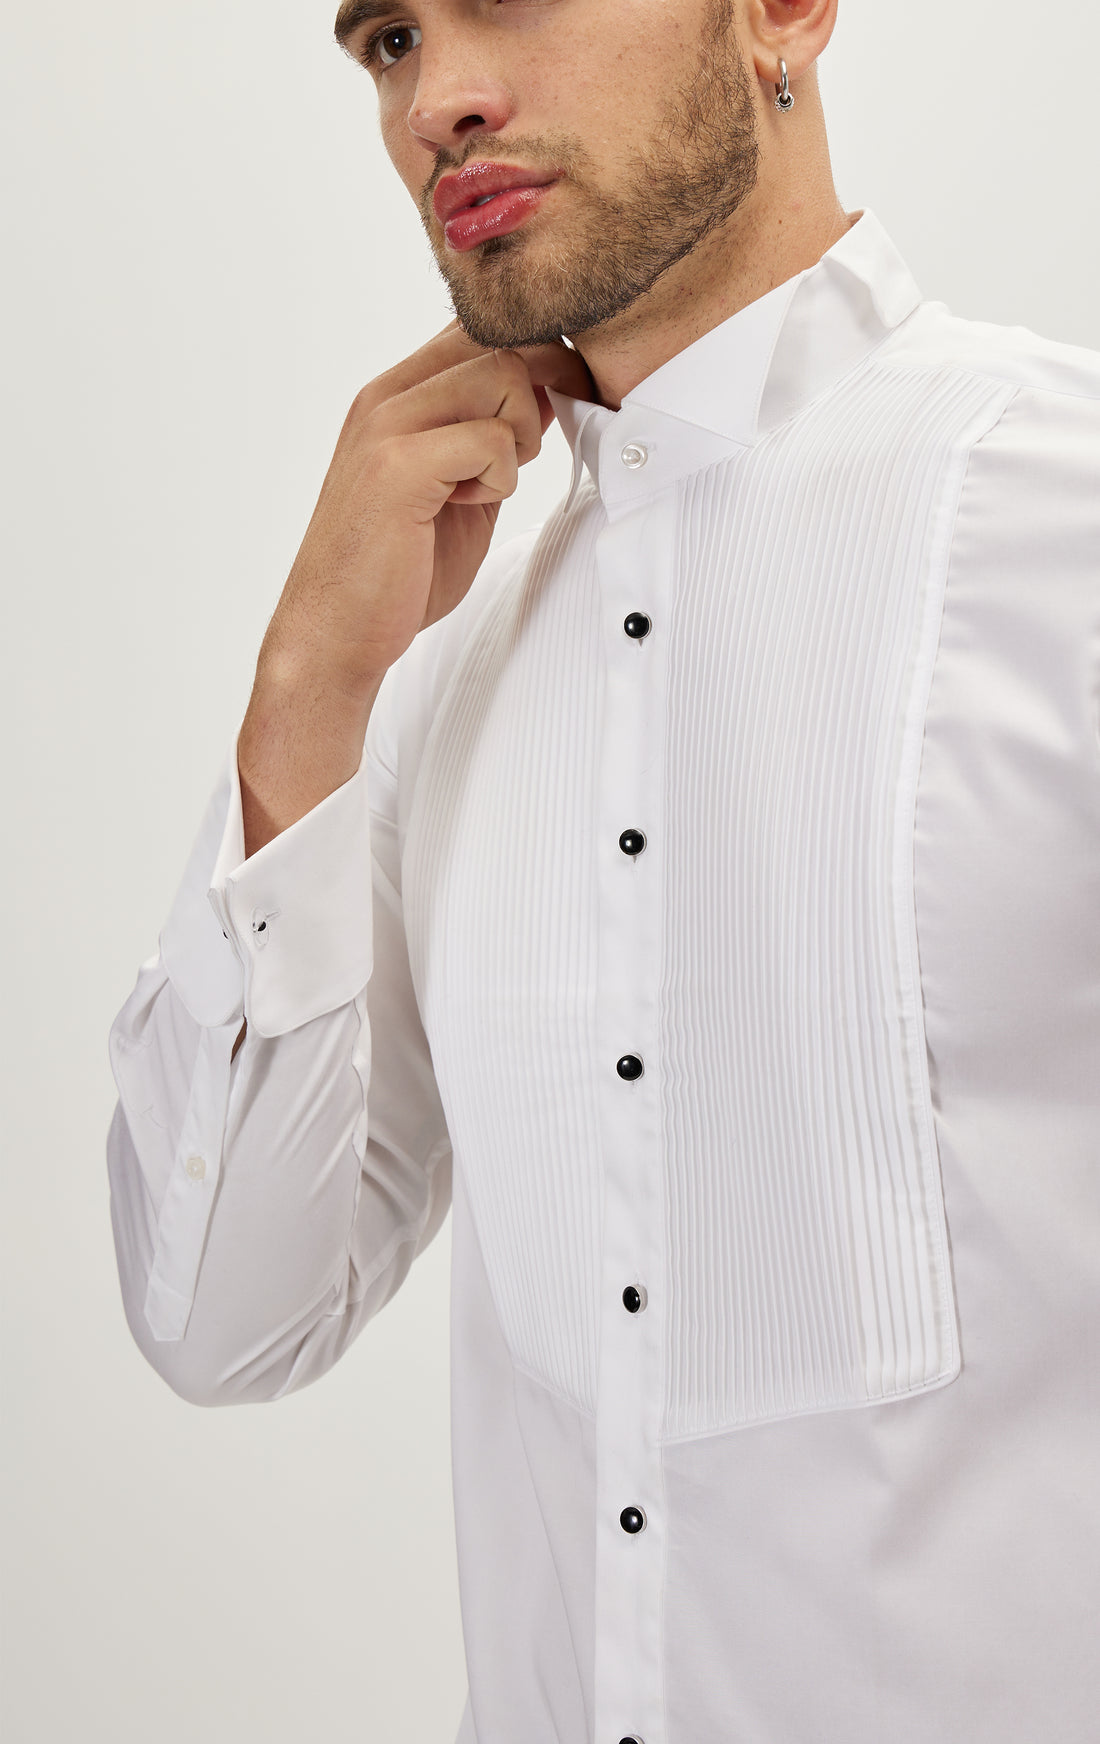 N° 4686 PURE COTTON PLEATED WING TIP COLLAR SHIRT - WHITE WHITE